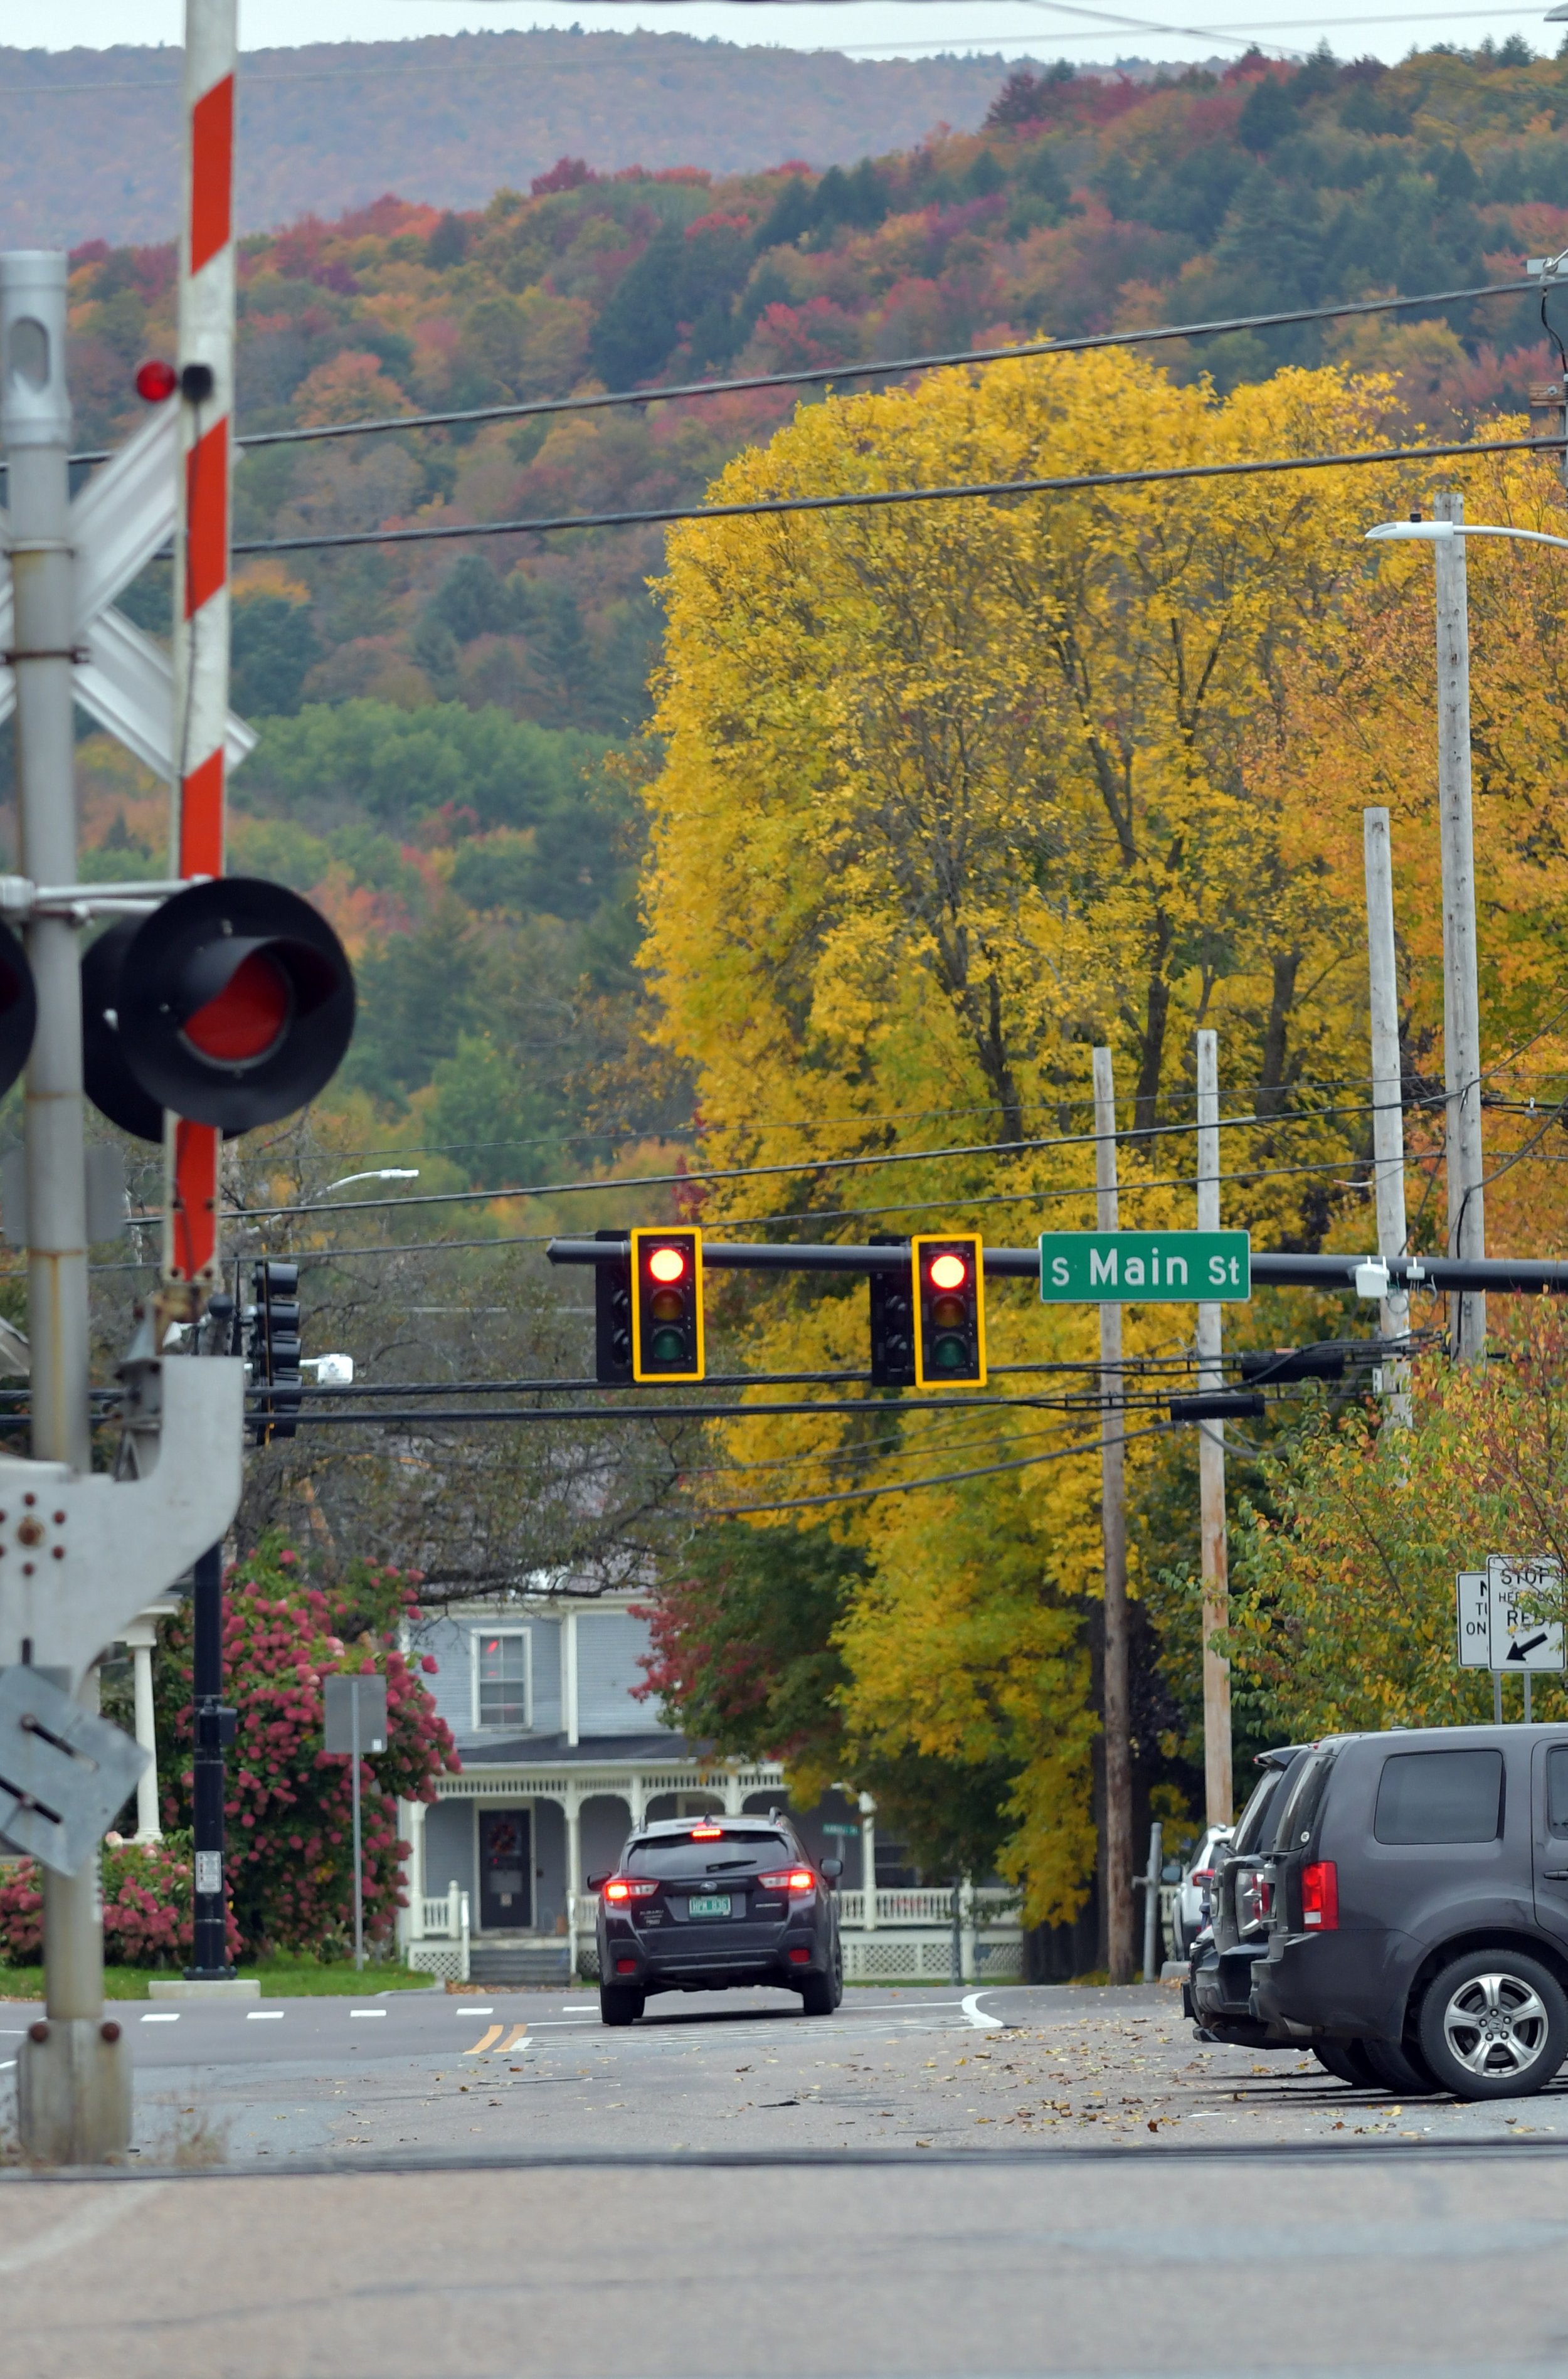   A look down Park Row finds color along the street and beyond on the hills in Duxbury. Photo by Gordon Miller  